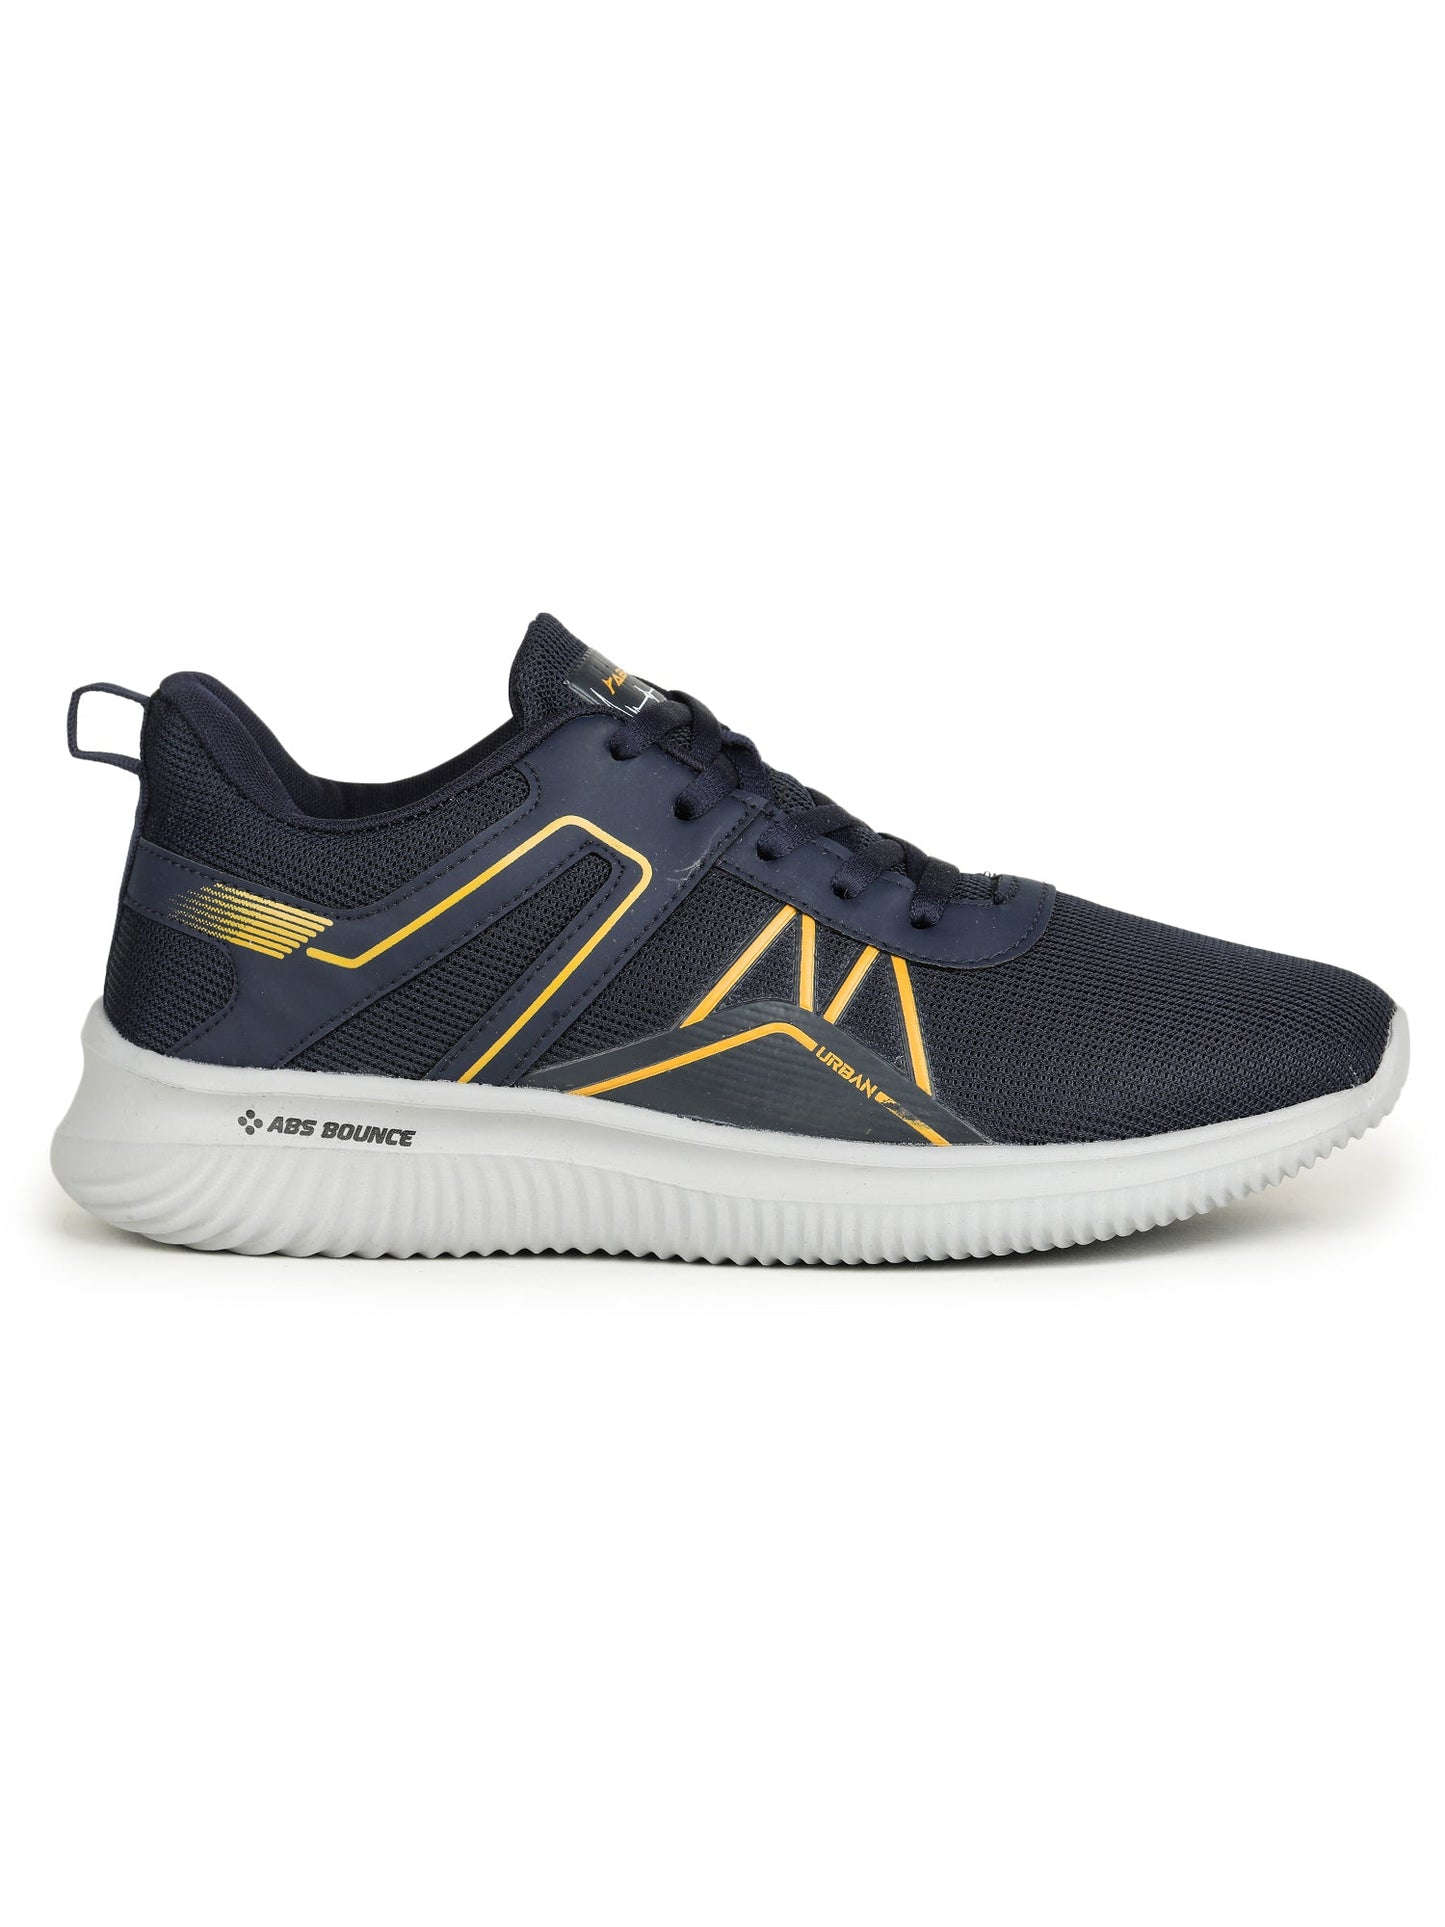 ABROS  SMITH-M RUNNING SPORTS SHOES FOR MEN